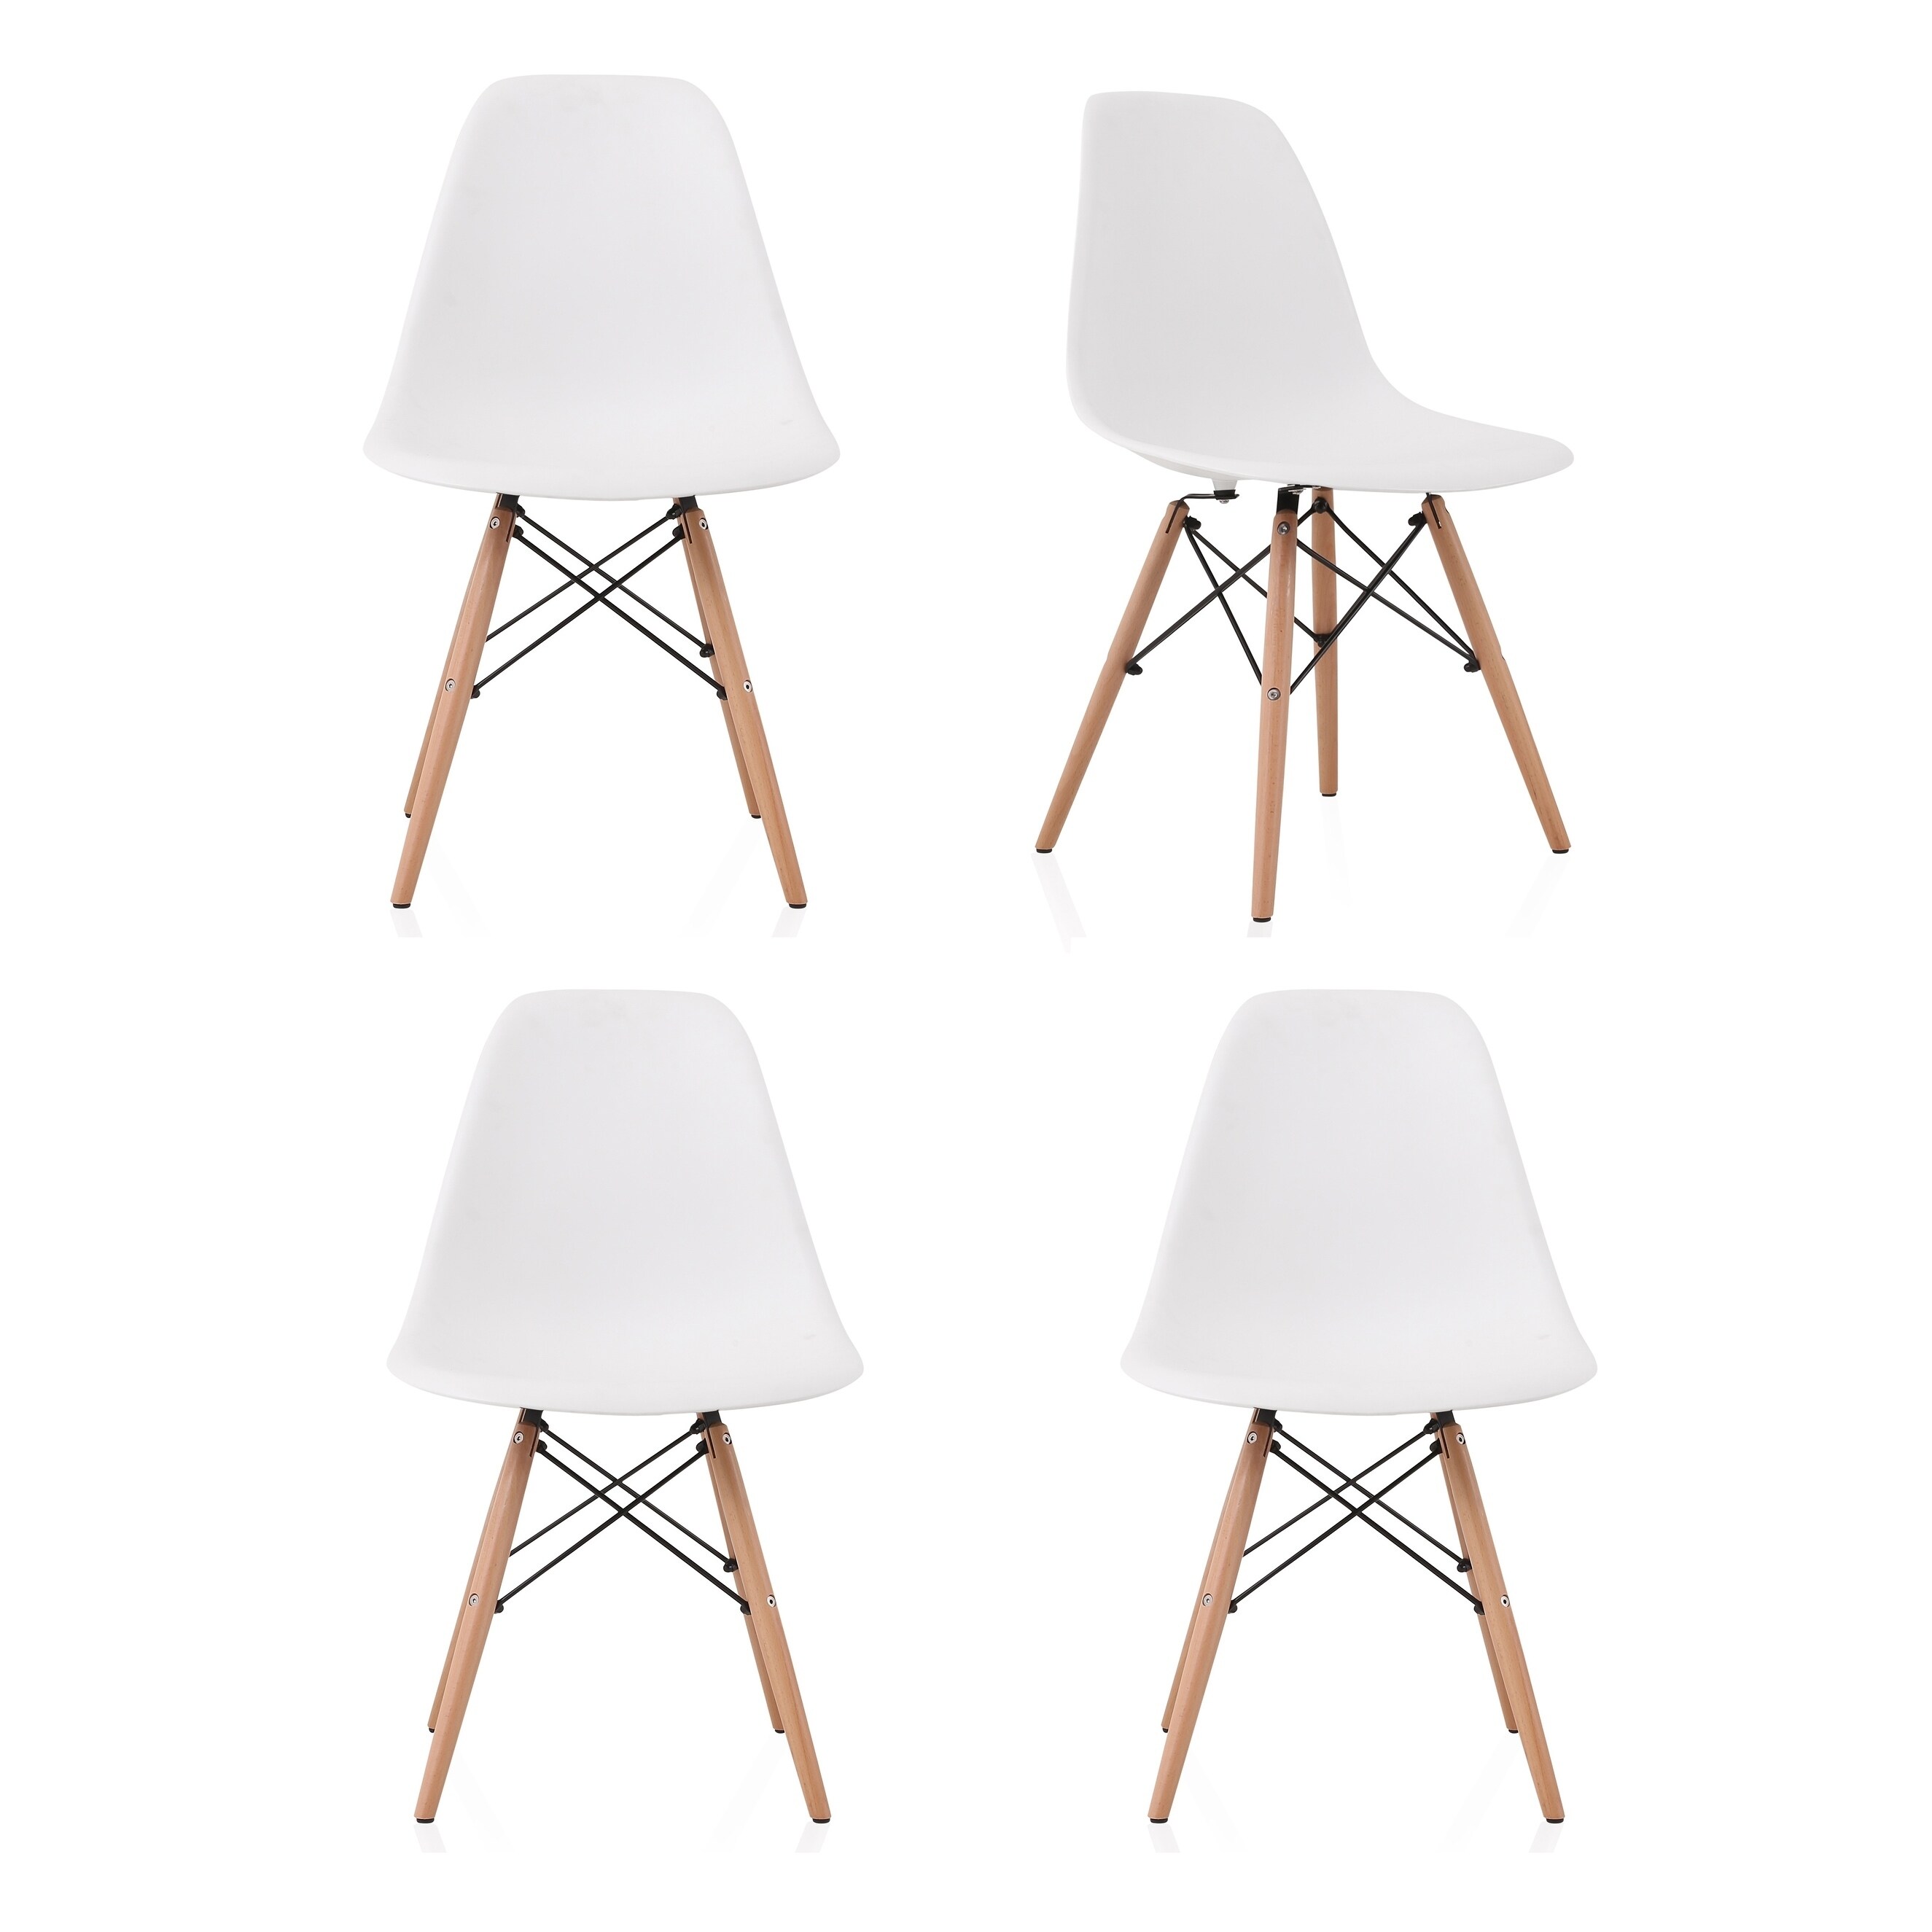 https://ak1.ostkcdn.com/images/products/18024570/CozyBlock-Set-of-4-Molded-White-Plastic-Dining-Shell-Chair-with-Beech-Wood-Eiffel-Legs-4abd907a-0c13-4ef3-94ae-2035c57e52c1.jpg